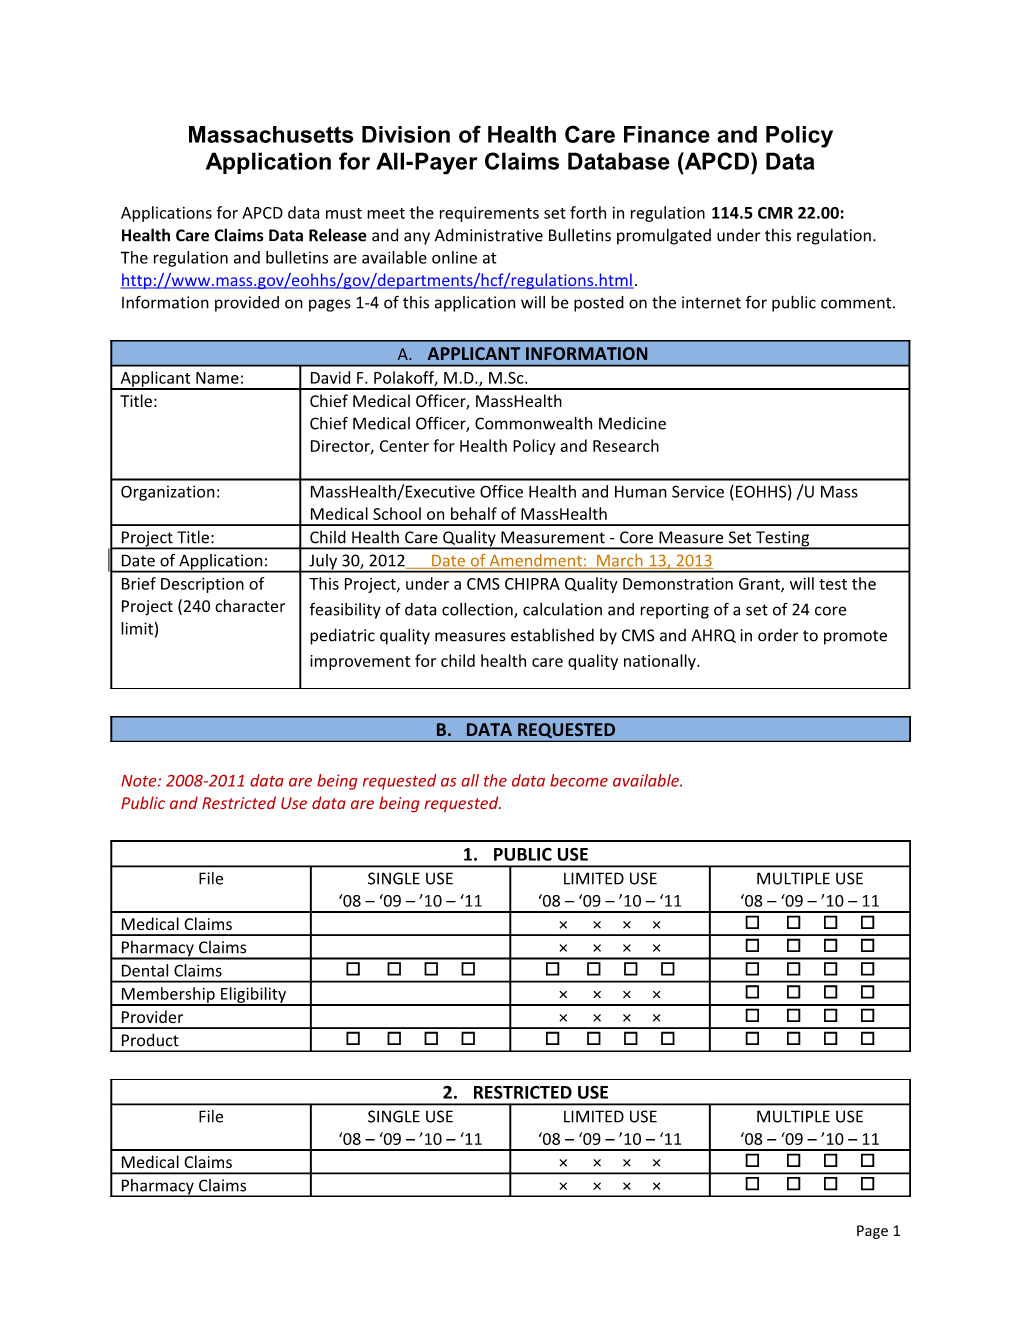 APCD Data Release Application Design Checklist (For Internal Use Only)